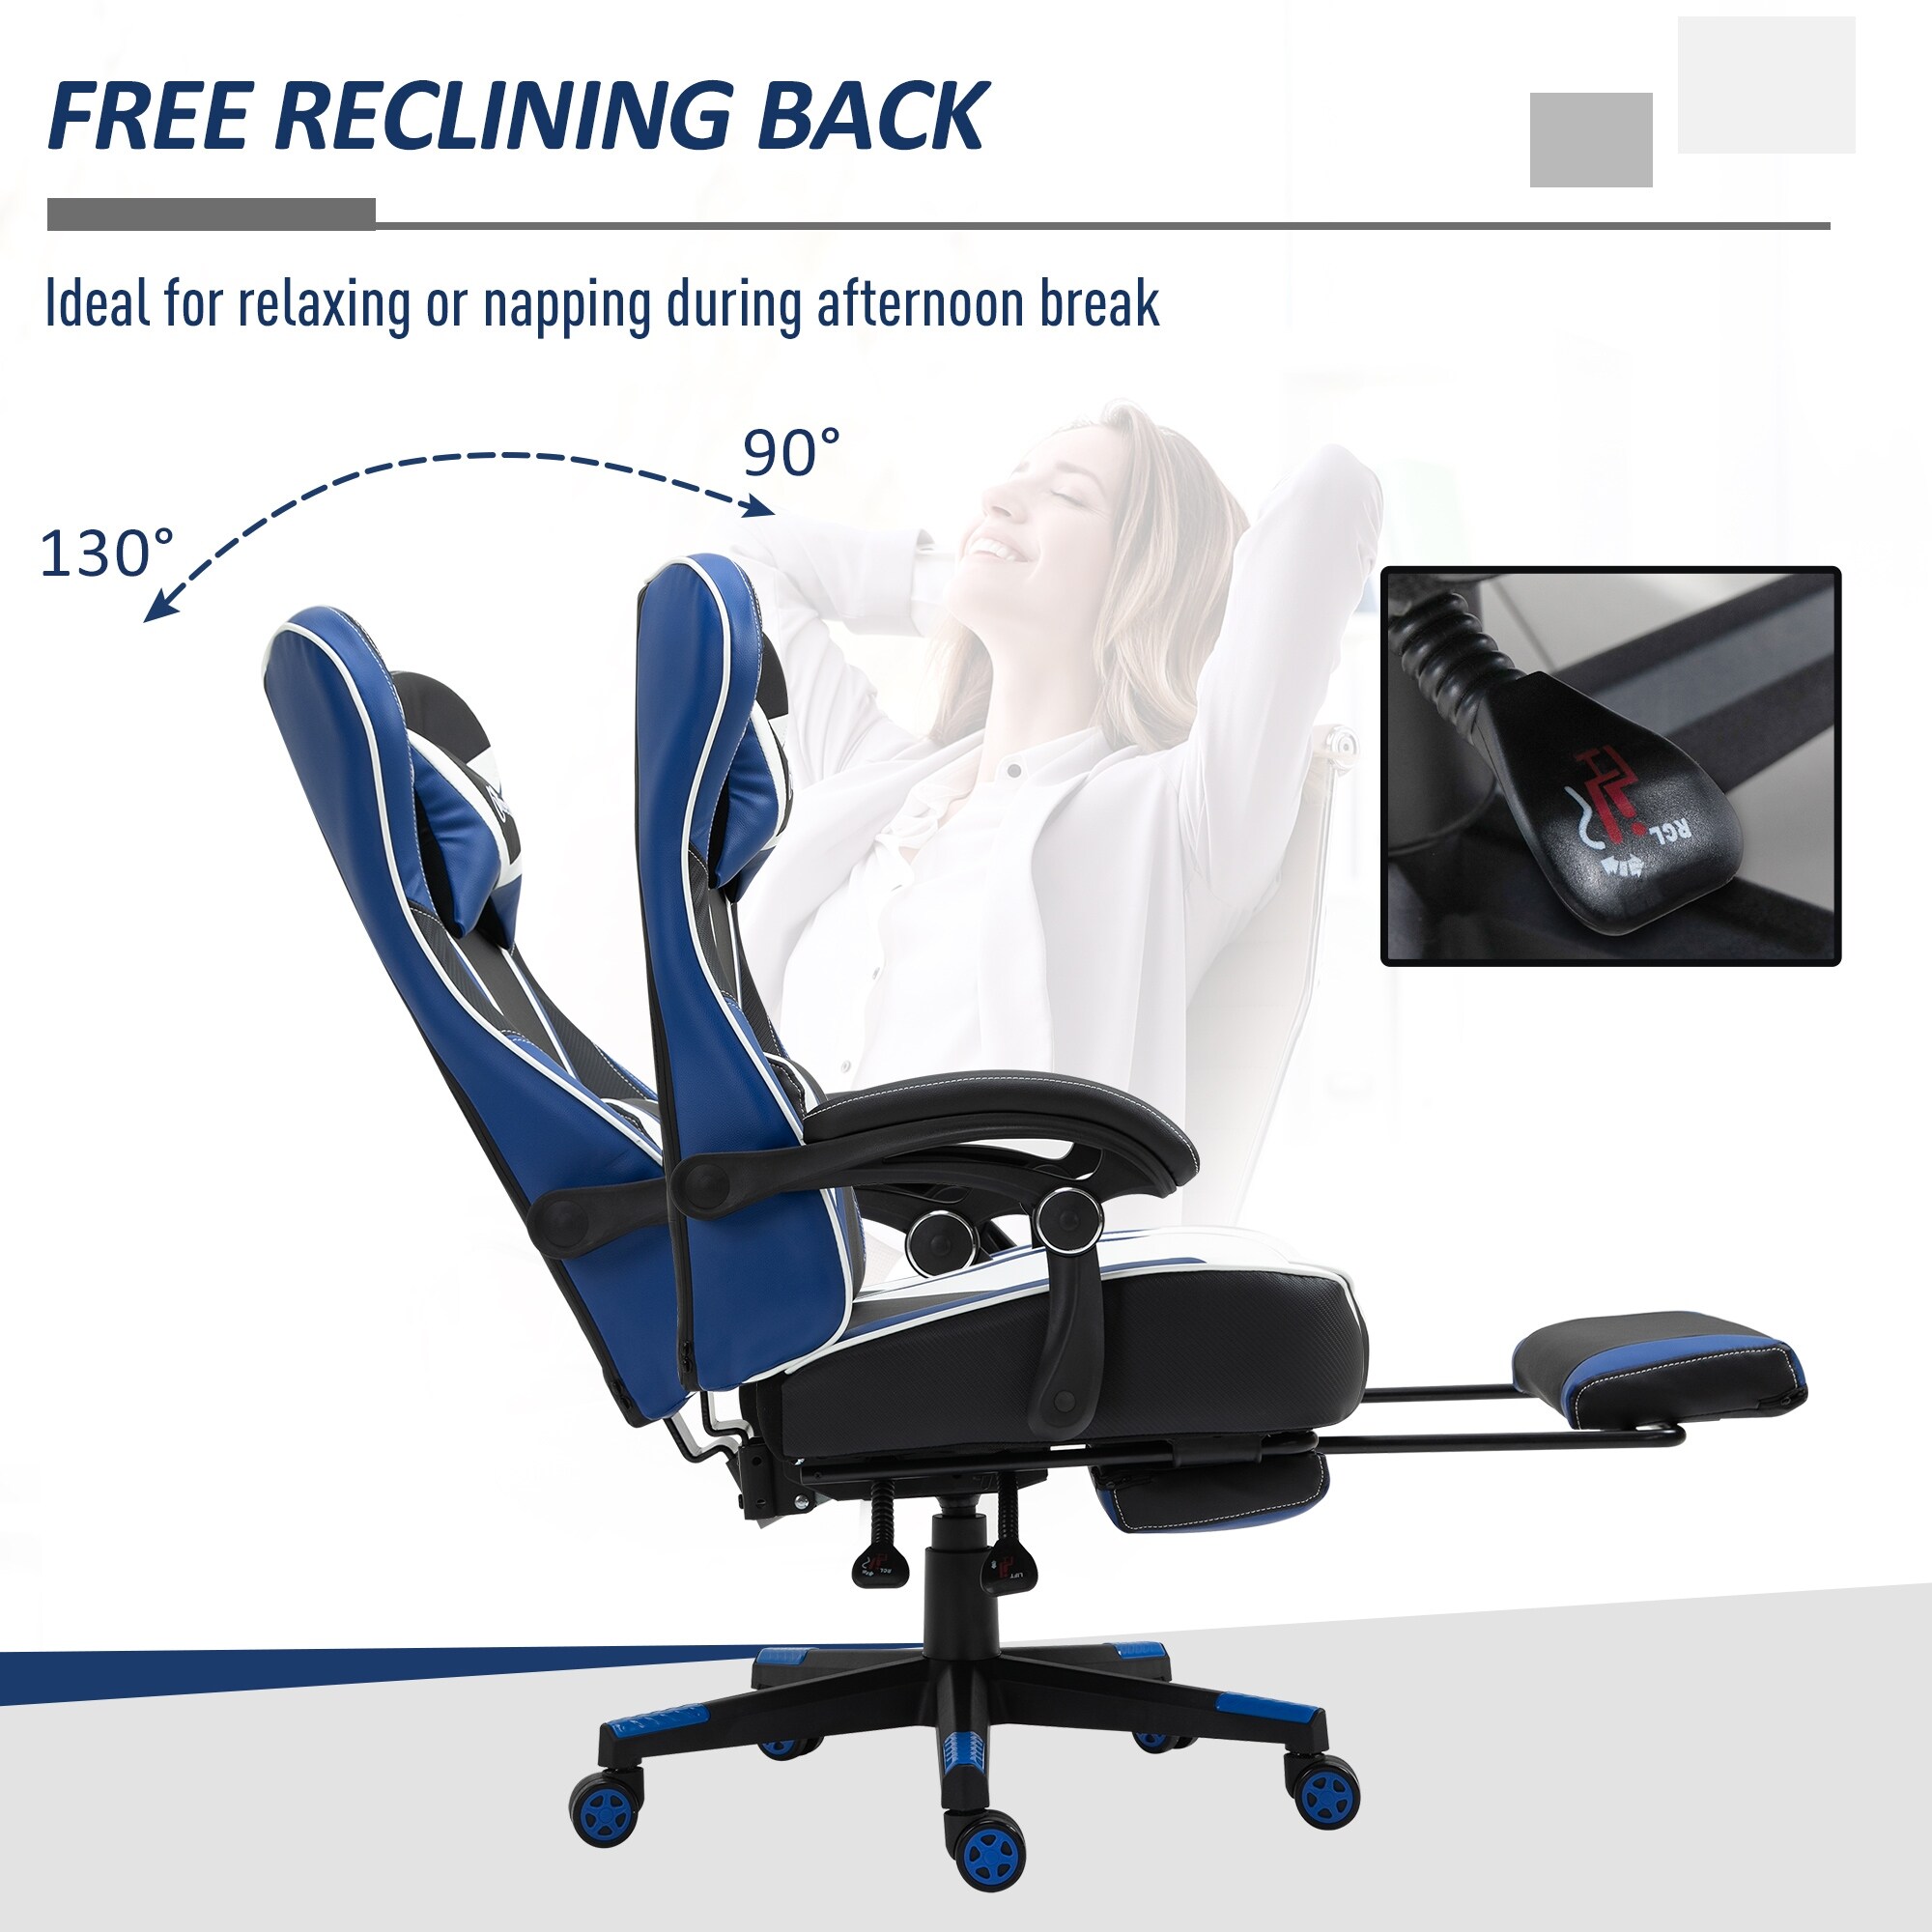 https://ak1.ostkcdn.com/images/products/is/images/direct/c17592a9c96585d31b1721cff43352057954e10c/Vinsetto-High-Back-Gaming-Chair-Recliner-Height-Adjustable-with-Pillow%2C-Massage-Lumbar%2C-and-Footrest.jpg